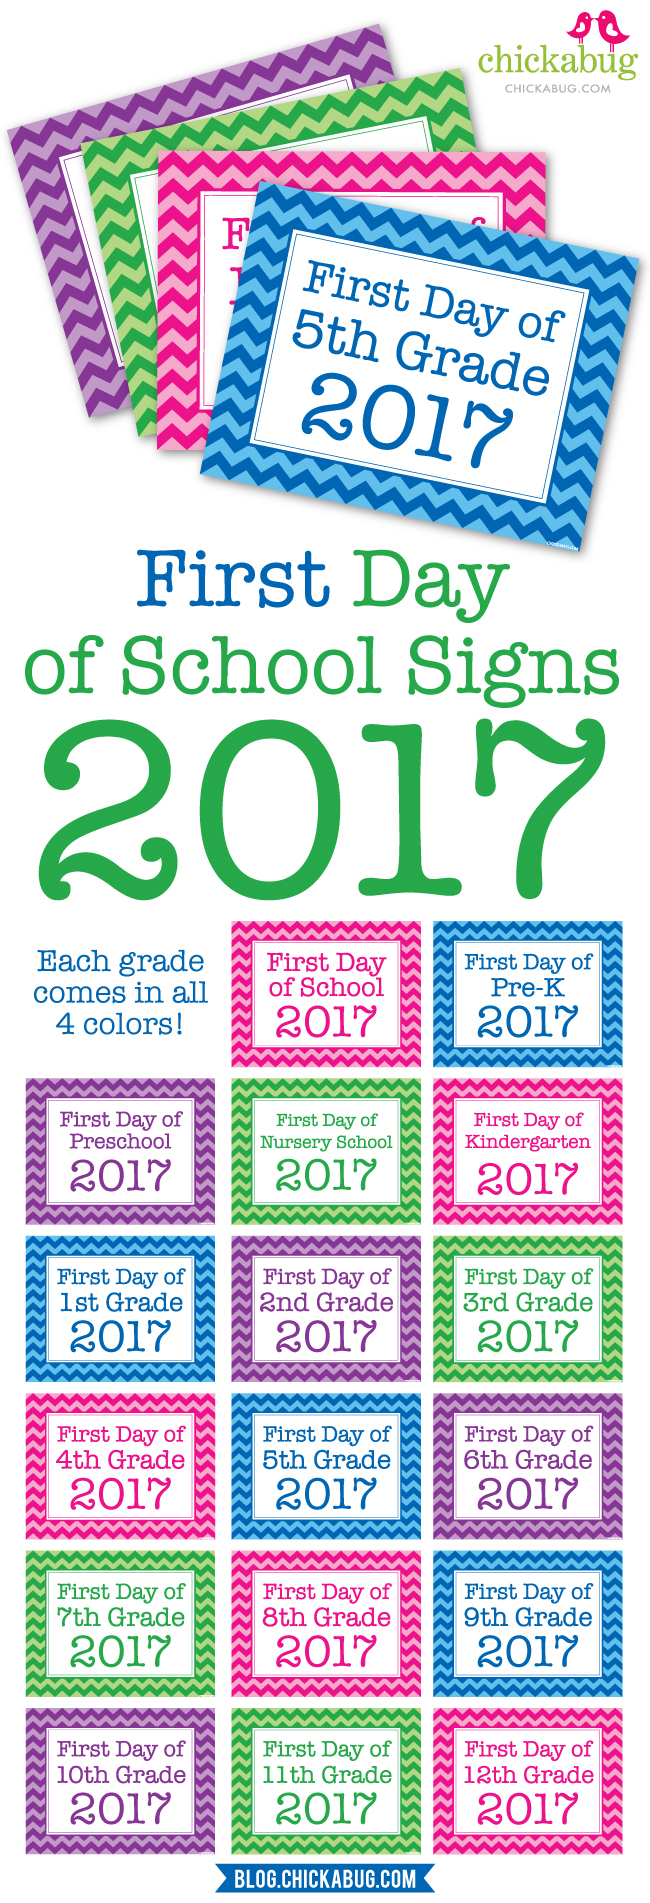 Free Printable First Day Of School Signs 2017 | Chickabug - Free Printable First Day Of School Signs 2017